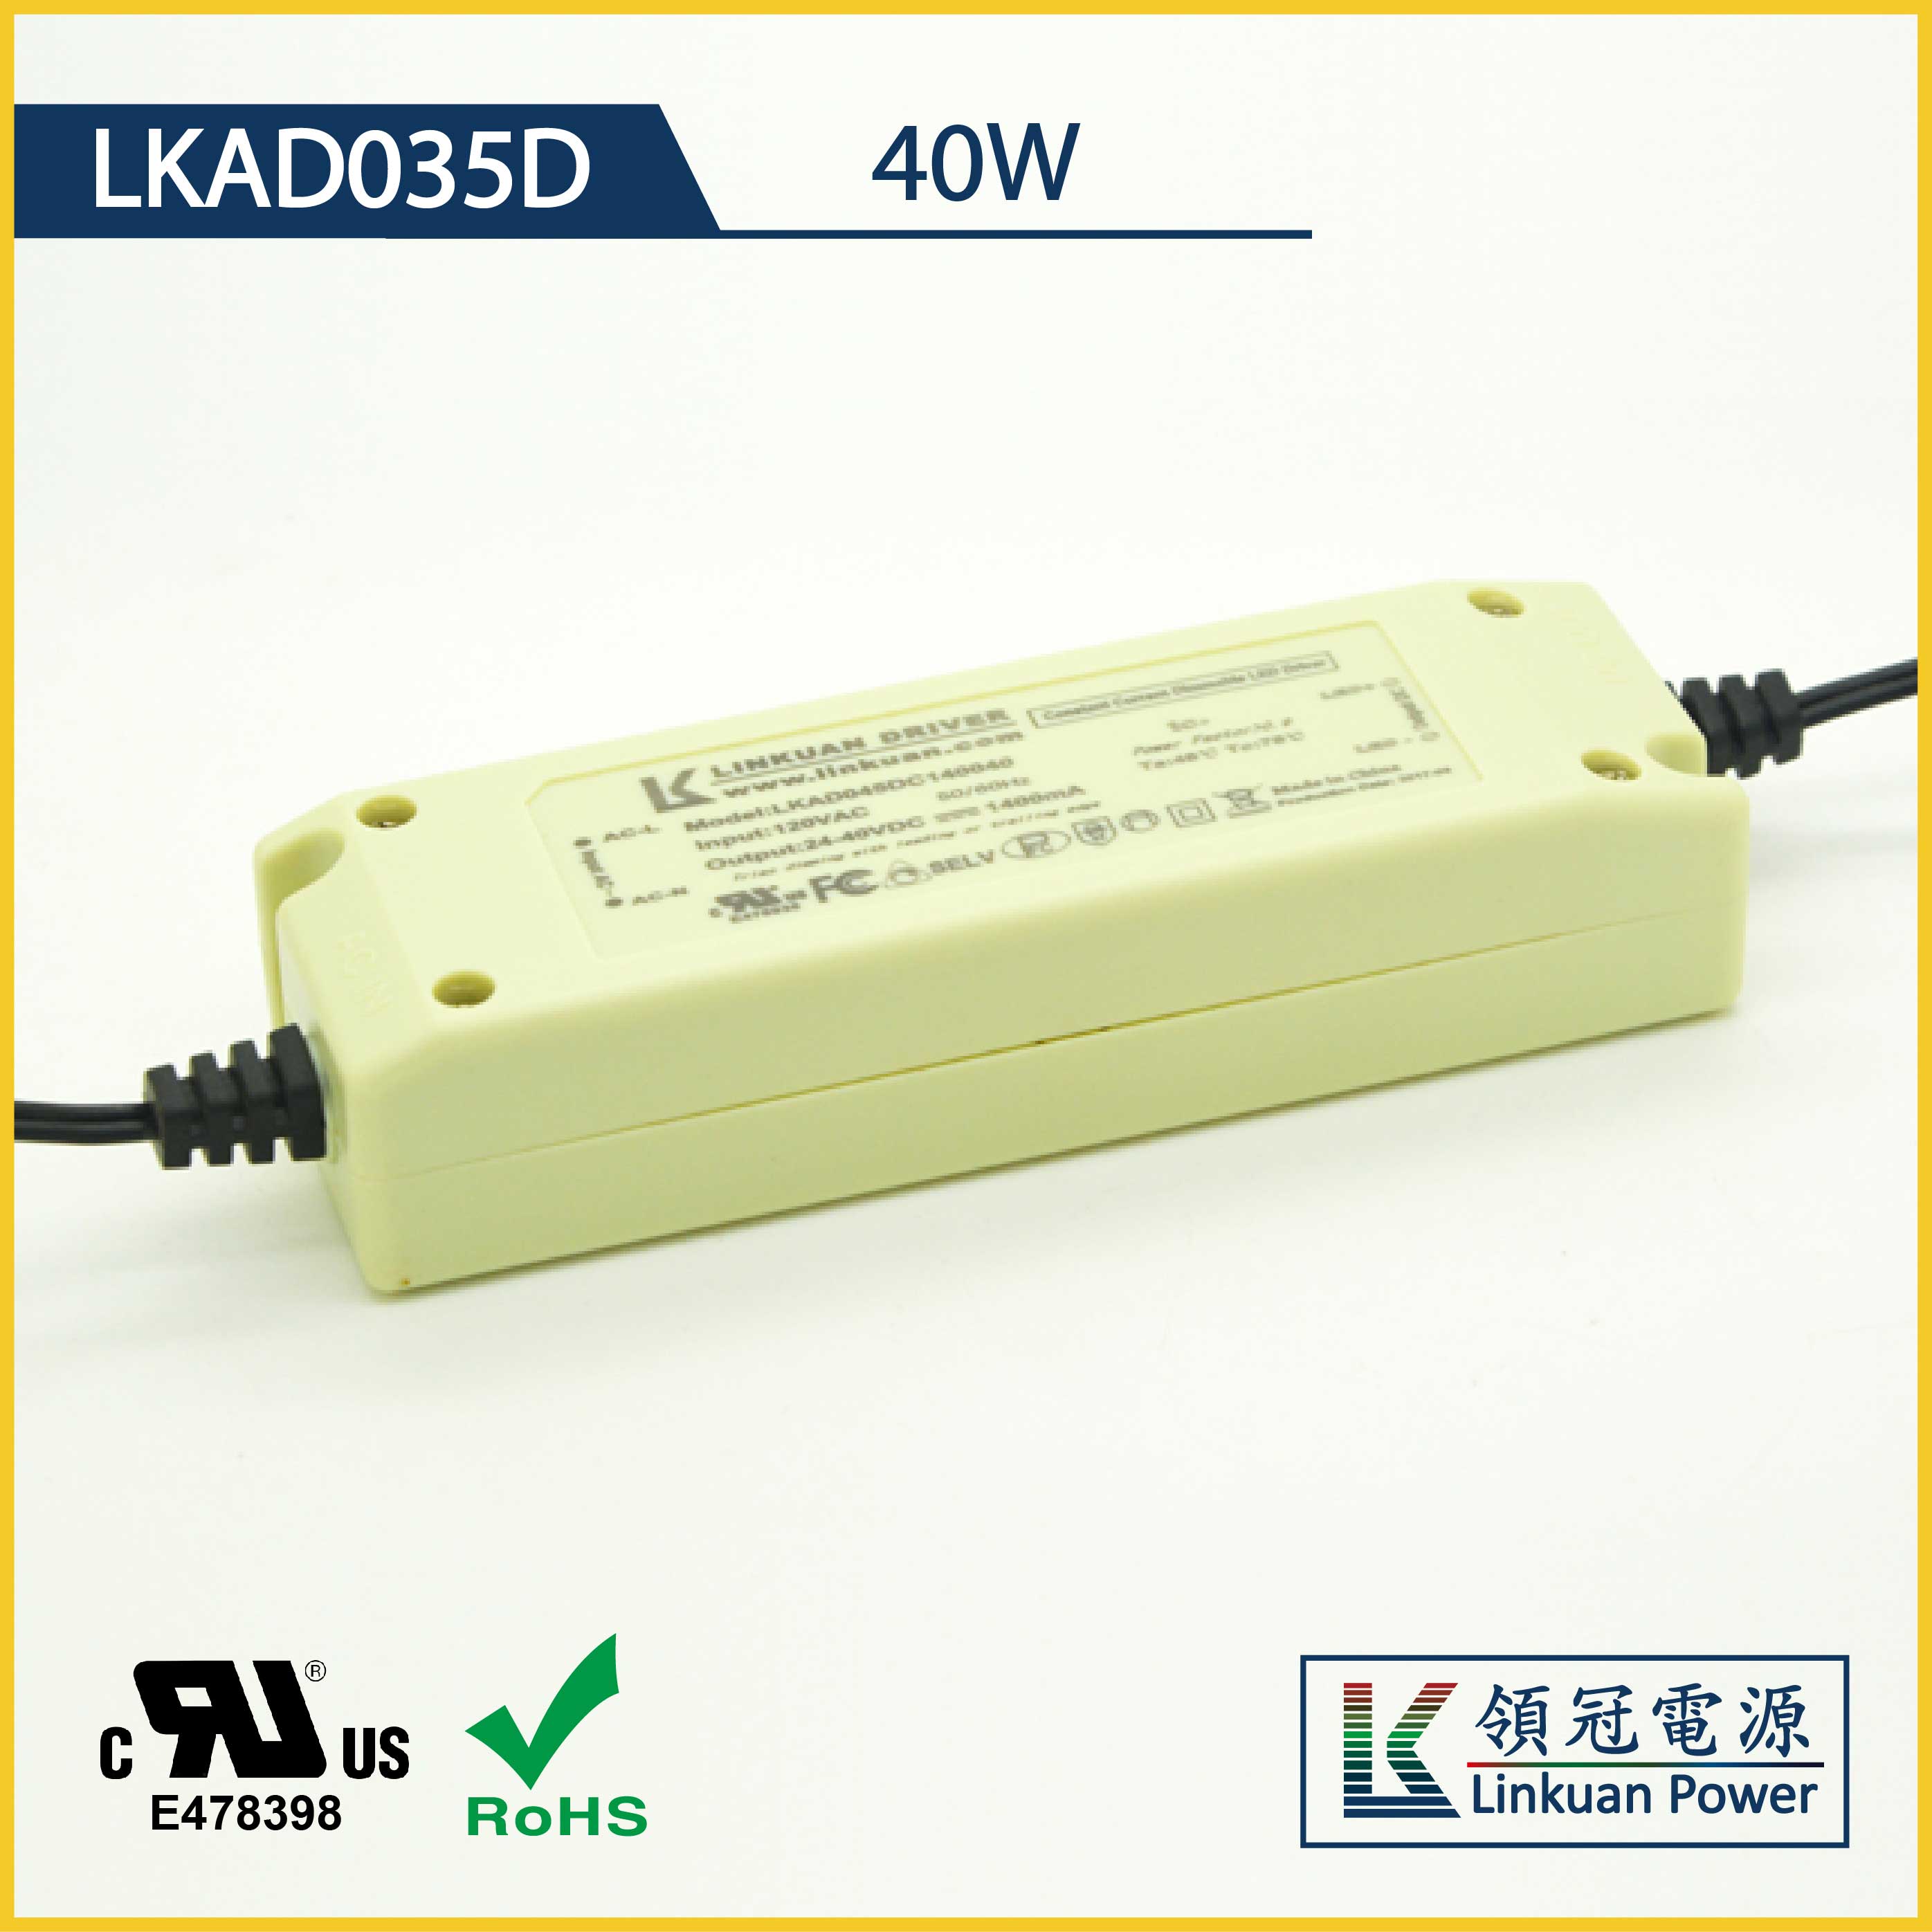 LKAD045D 60W 24-40V 1500 Dimmable LED drivers